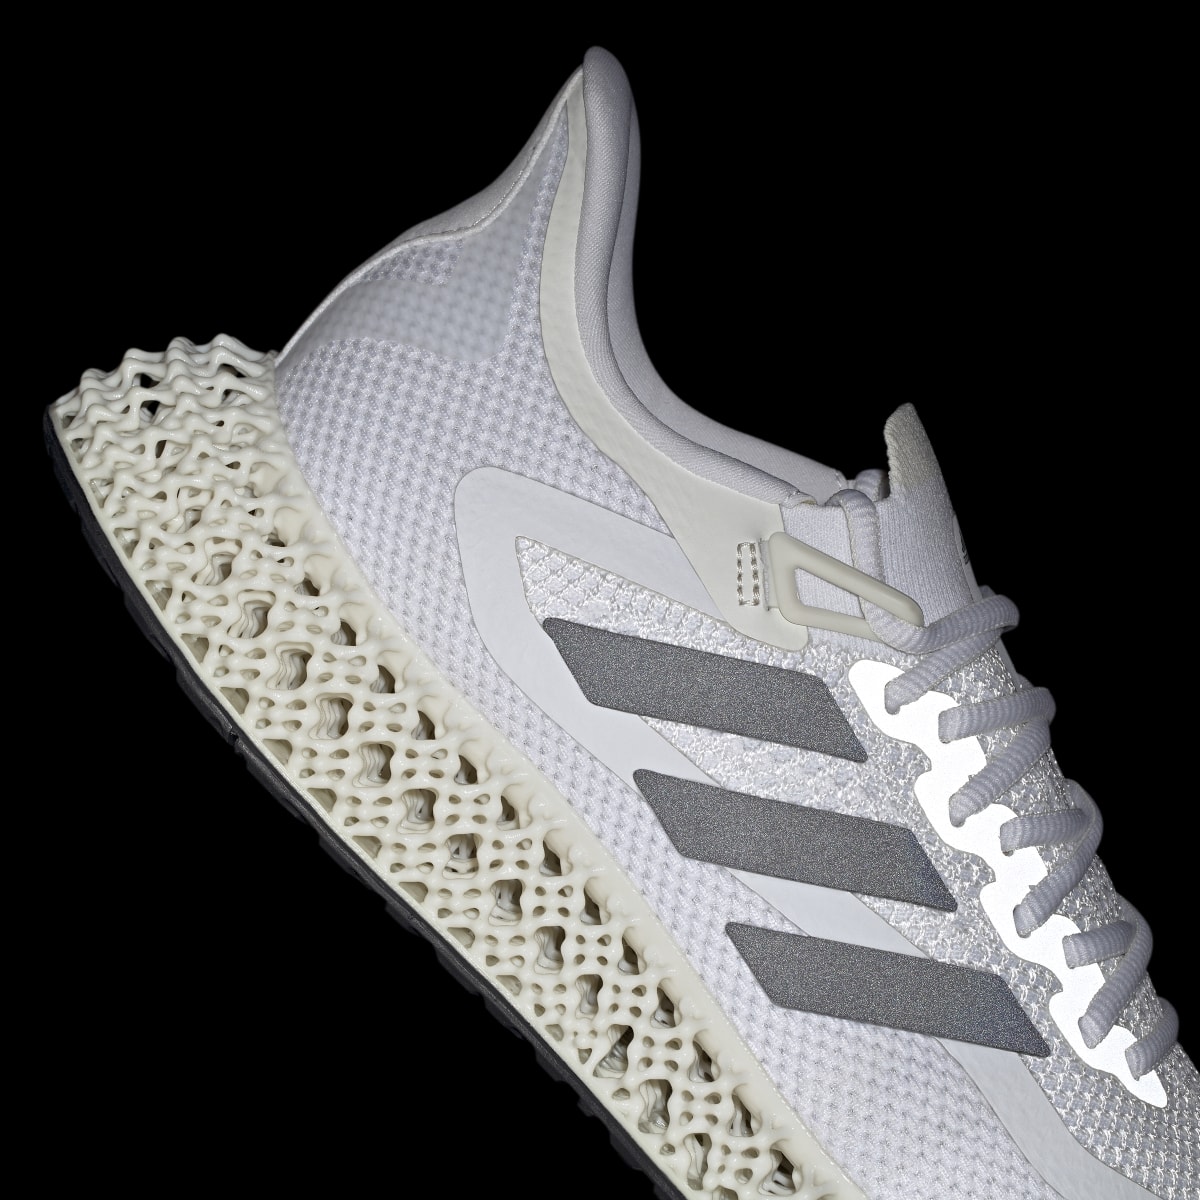 Adidas 4DFWD 2 Running Shoes. 4